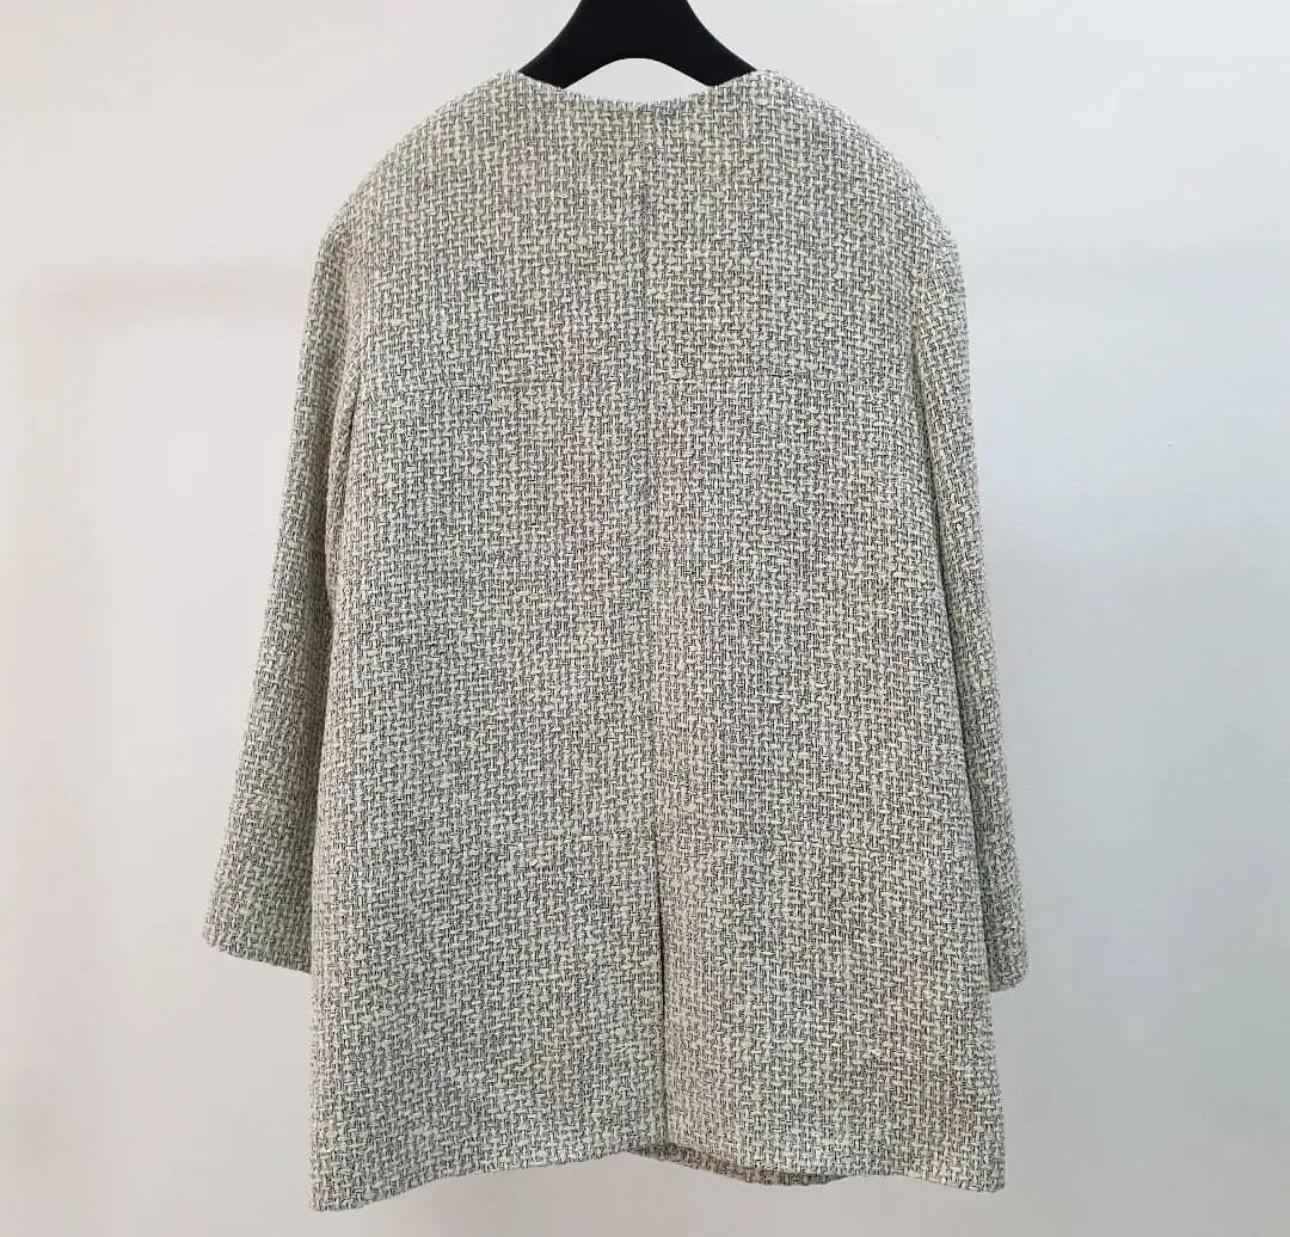 From the Spring 2014 Collection. Creme and grey Chanel tweed short coat with dual welt pockets, structured shoulders, crew neck, chain at interior hem, interlocking CC embellishment at front and hook-and-eye closures at front.

Sz.40

Like new